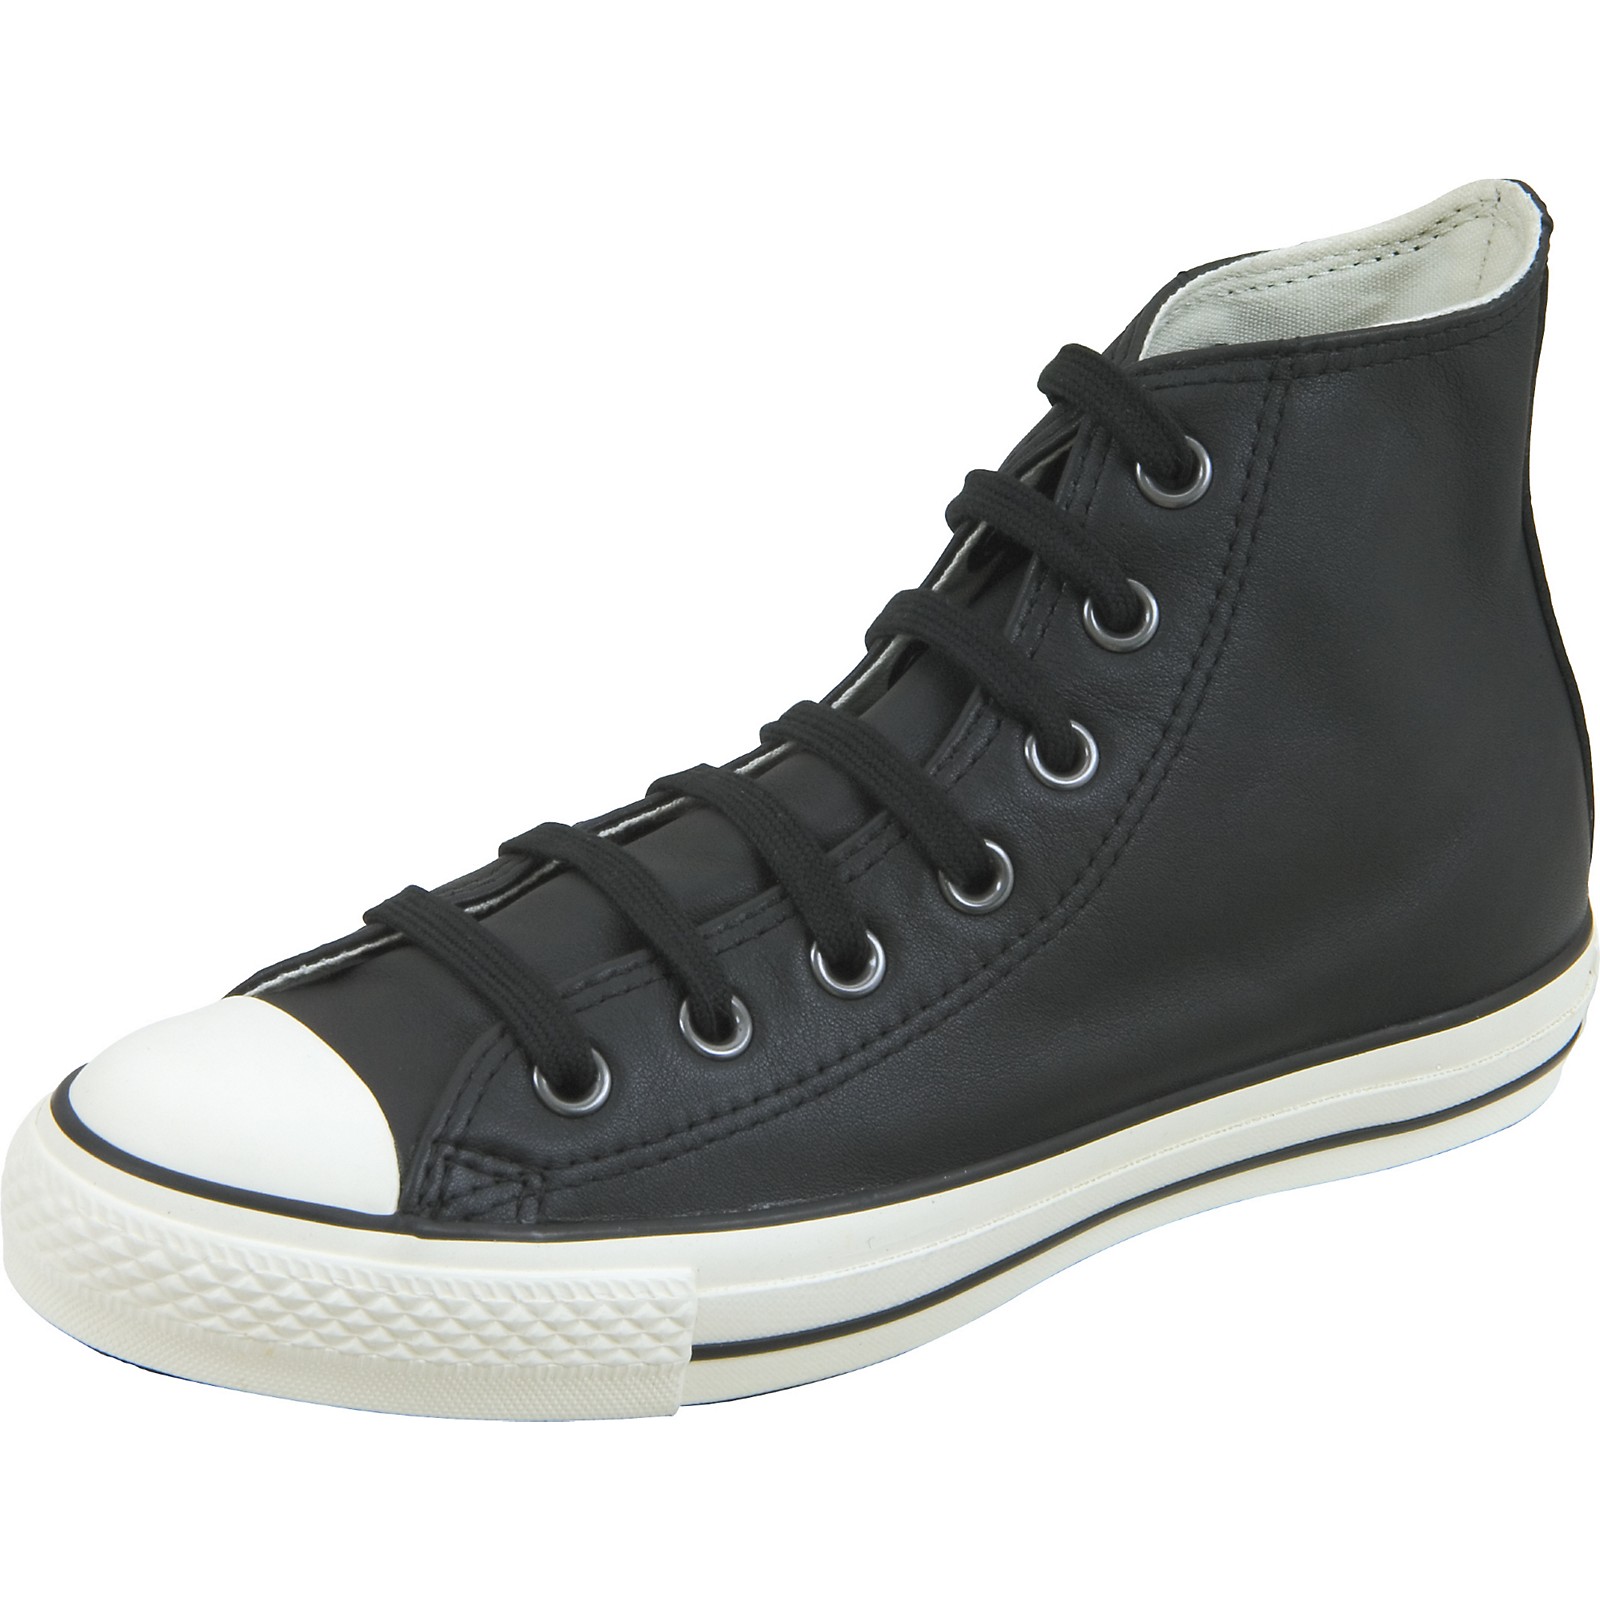 Converse Chuck Taylor All Star Leather Hi Tops Musician S Friend